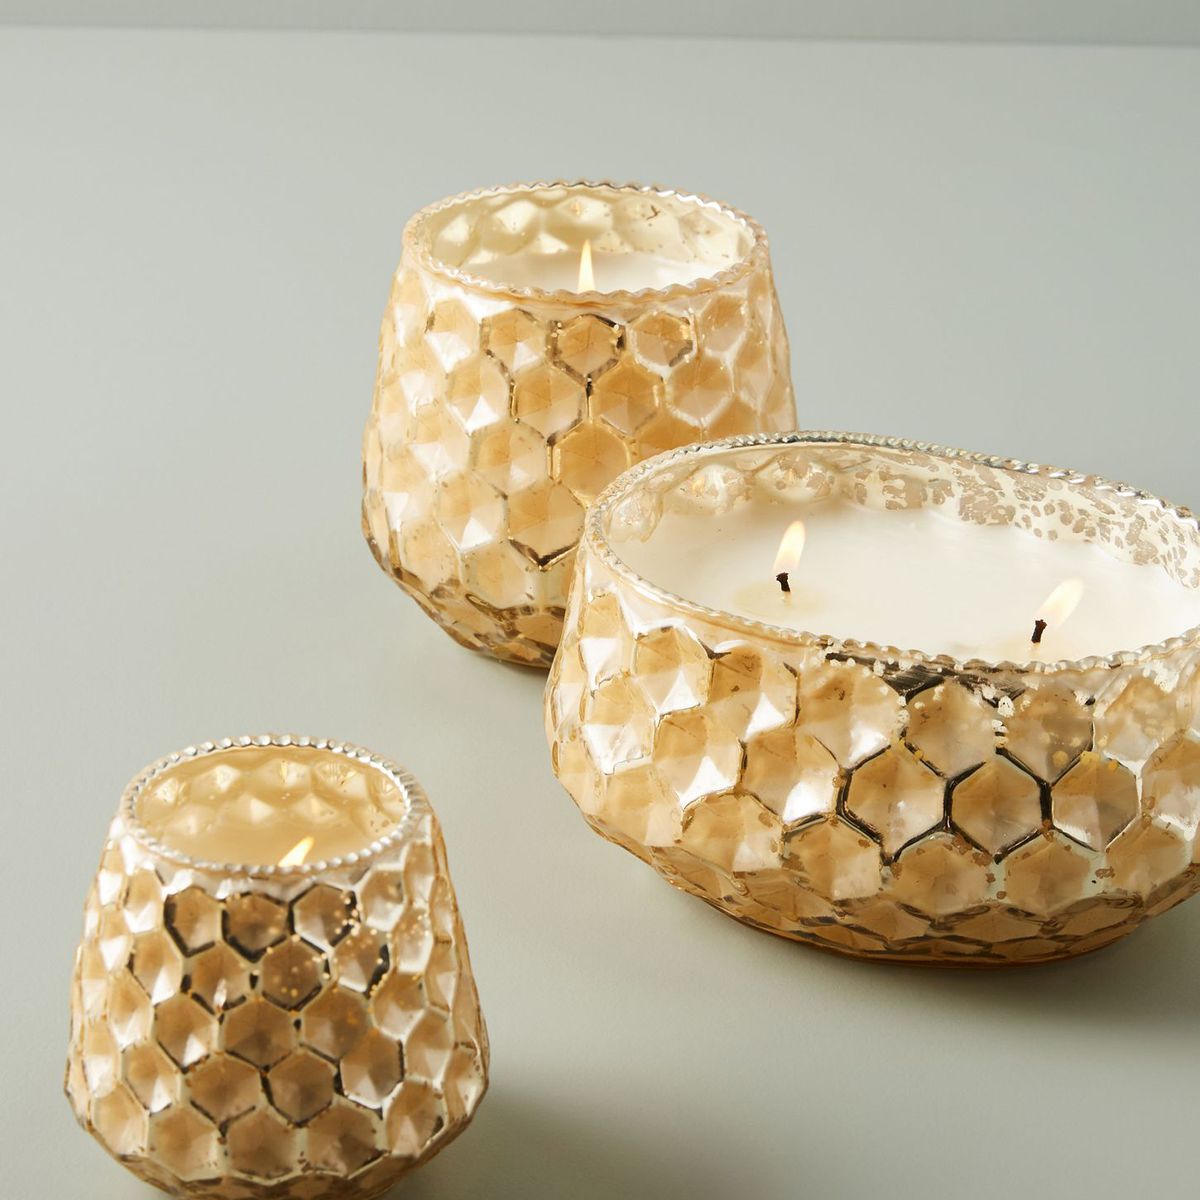 Three candles of different sizes with a honeycomb pattern on the container.